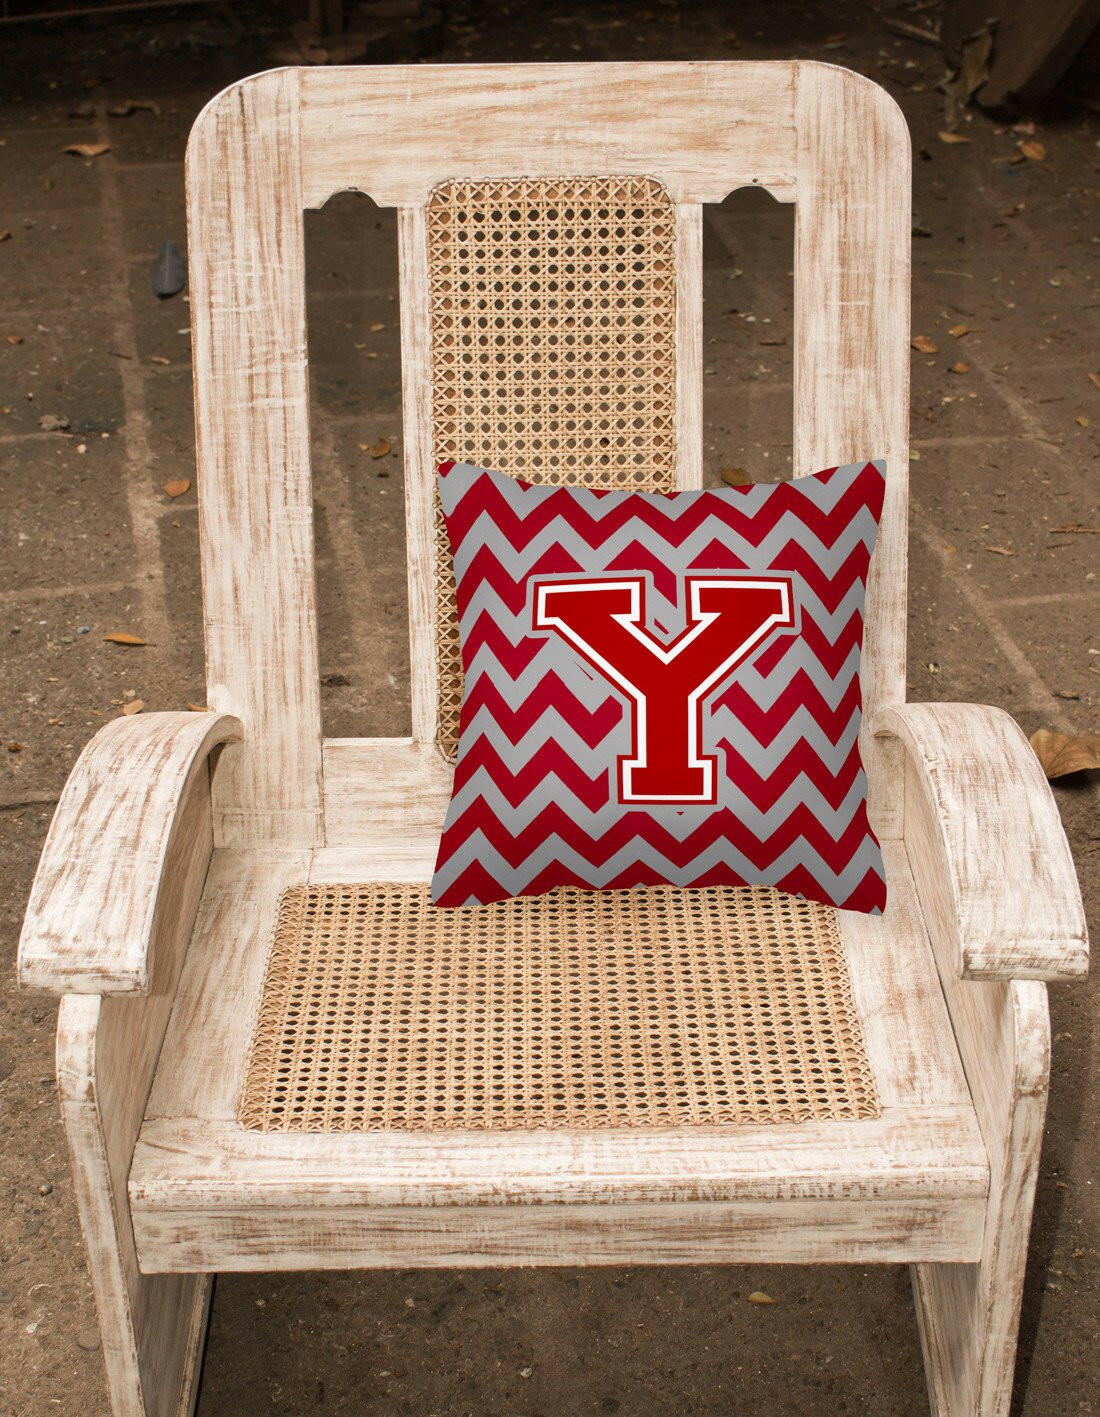 Letter Y Chevron Maroon and White Fabric Decorative Pillow CJ1049-YPW1414 by Caroline's Treasures